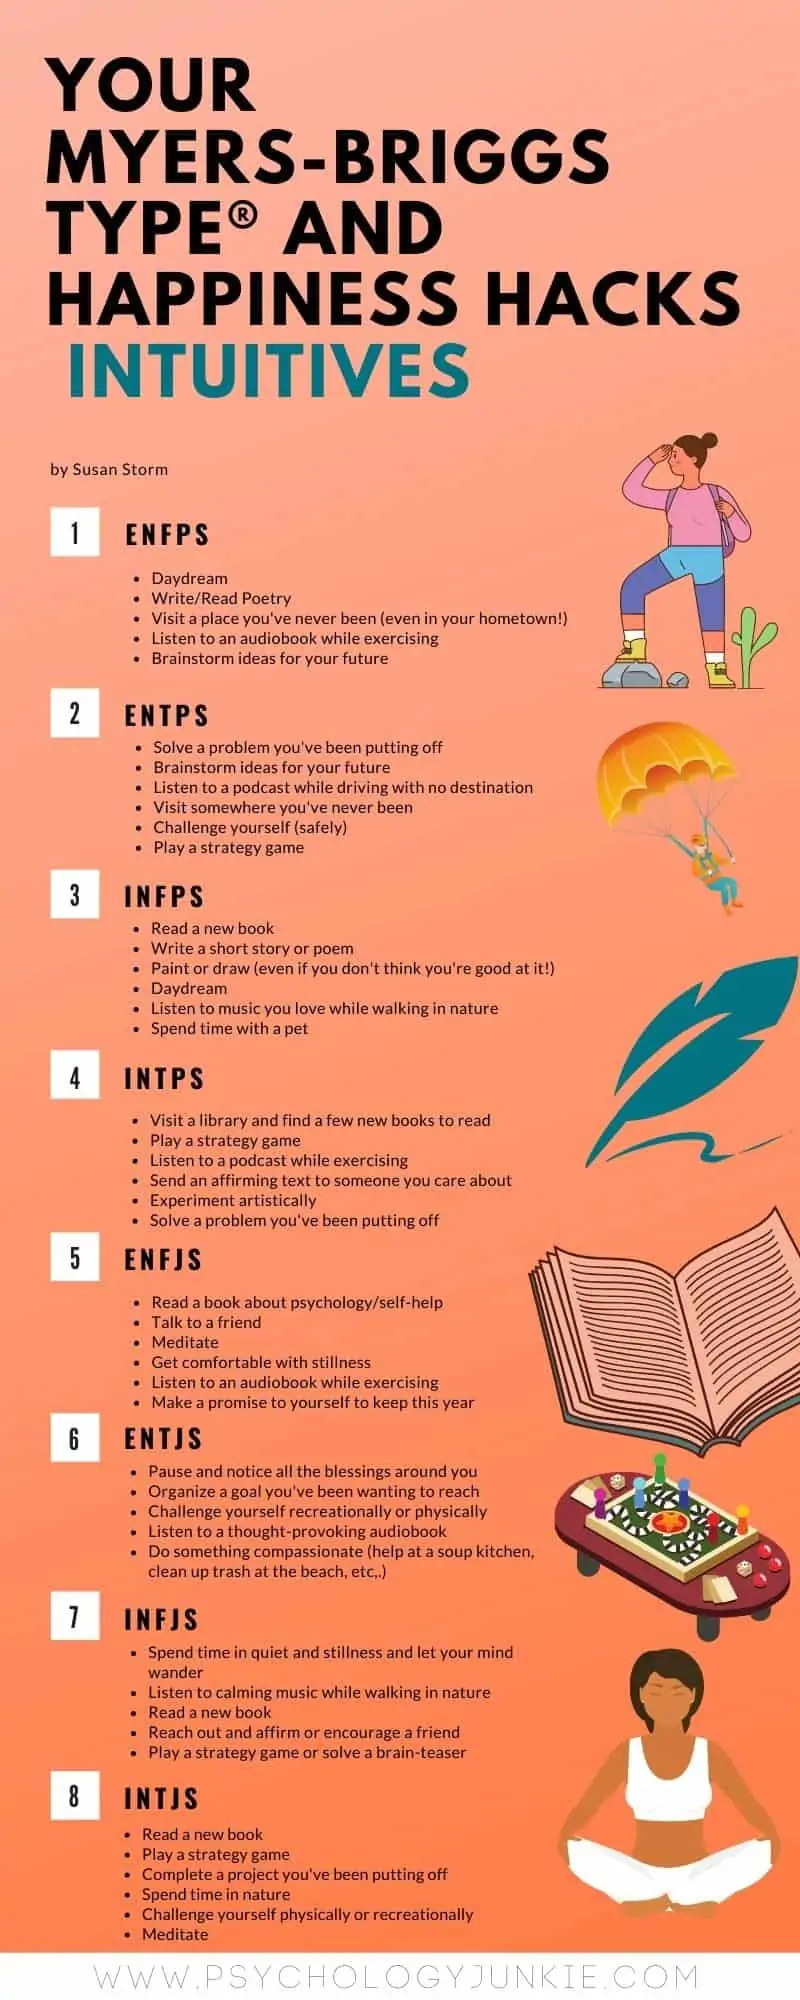 Discover happiness hacks for every intuitive Myers-Briggs personality type. #Personality #MBTI